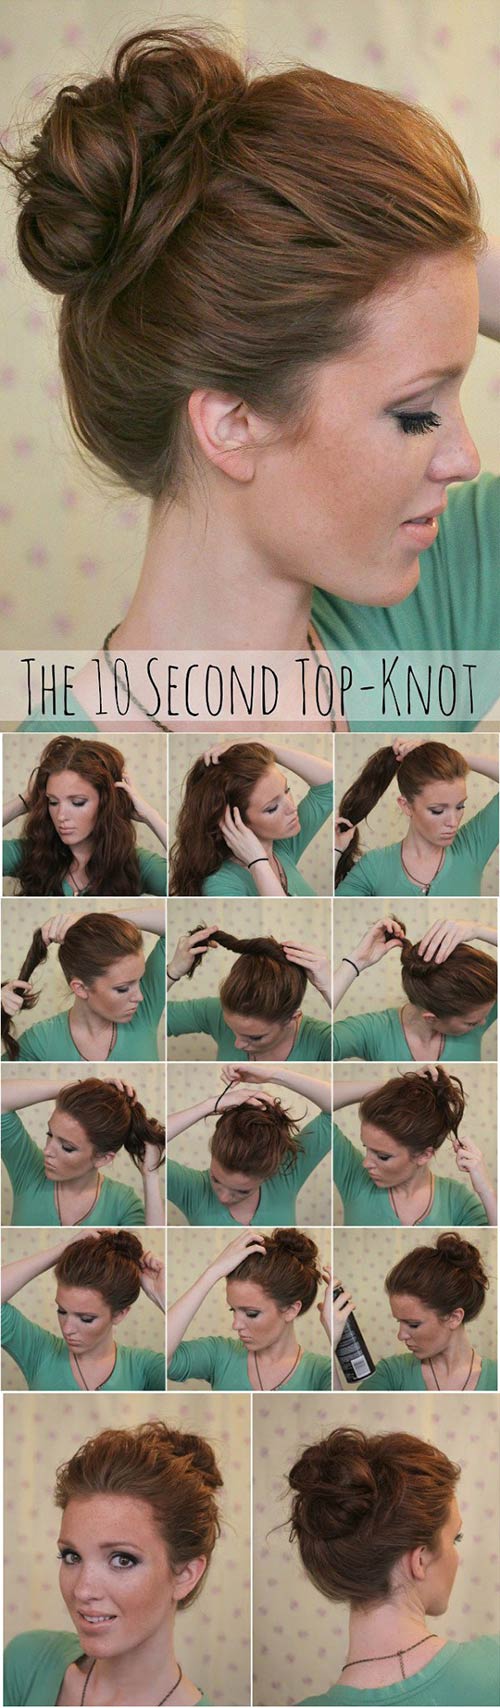 10-Second-Top-Knot hairstyle for girls